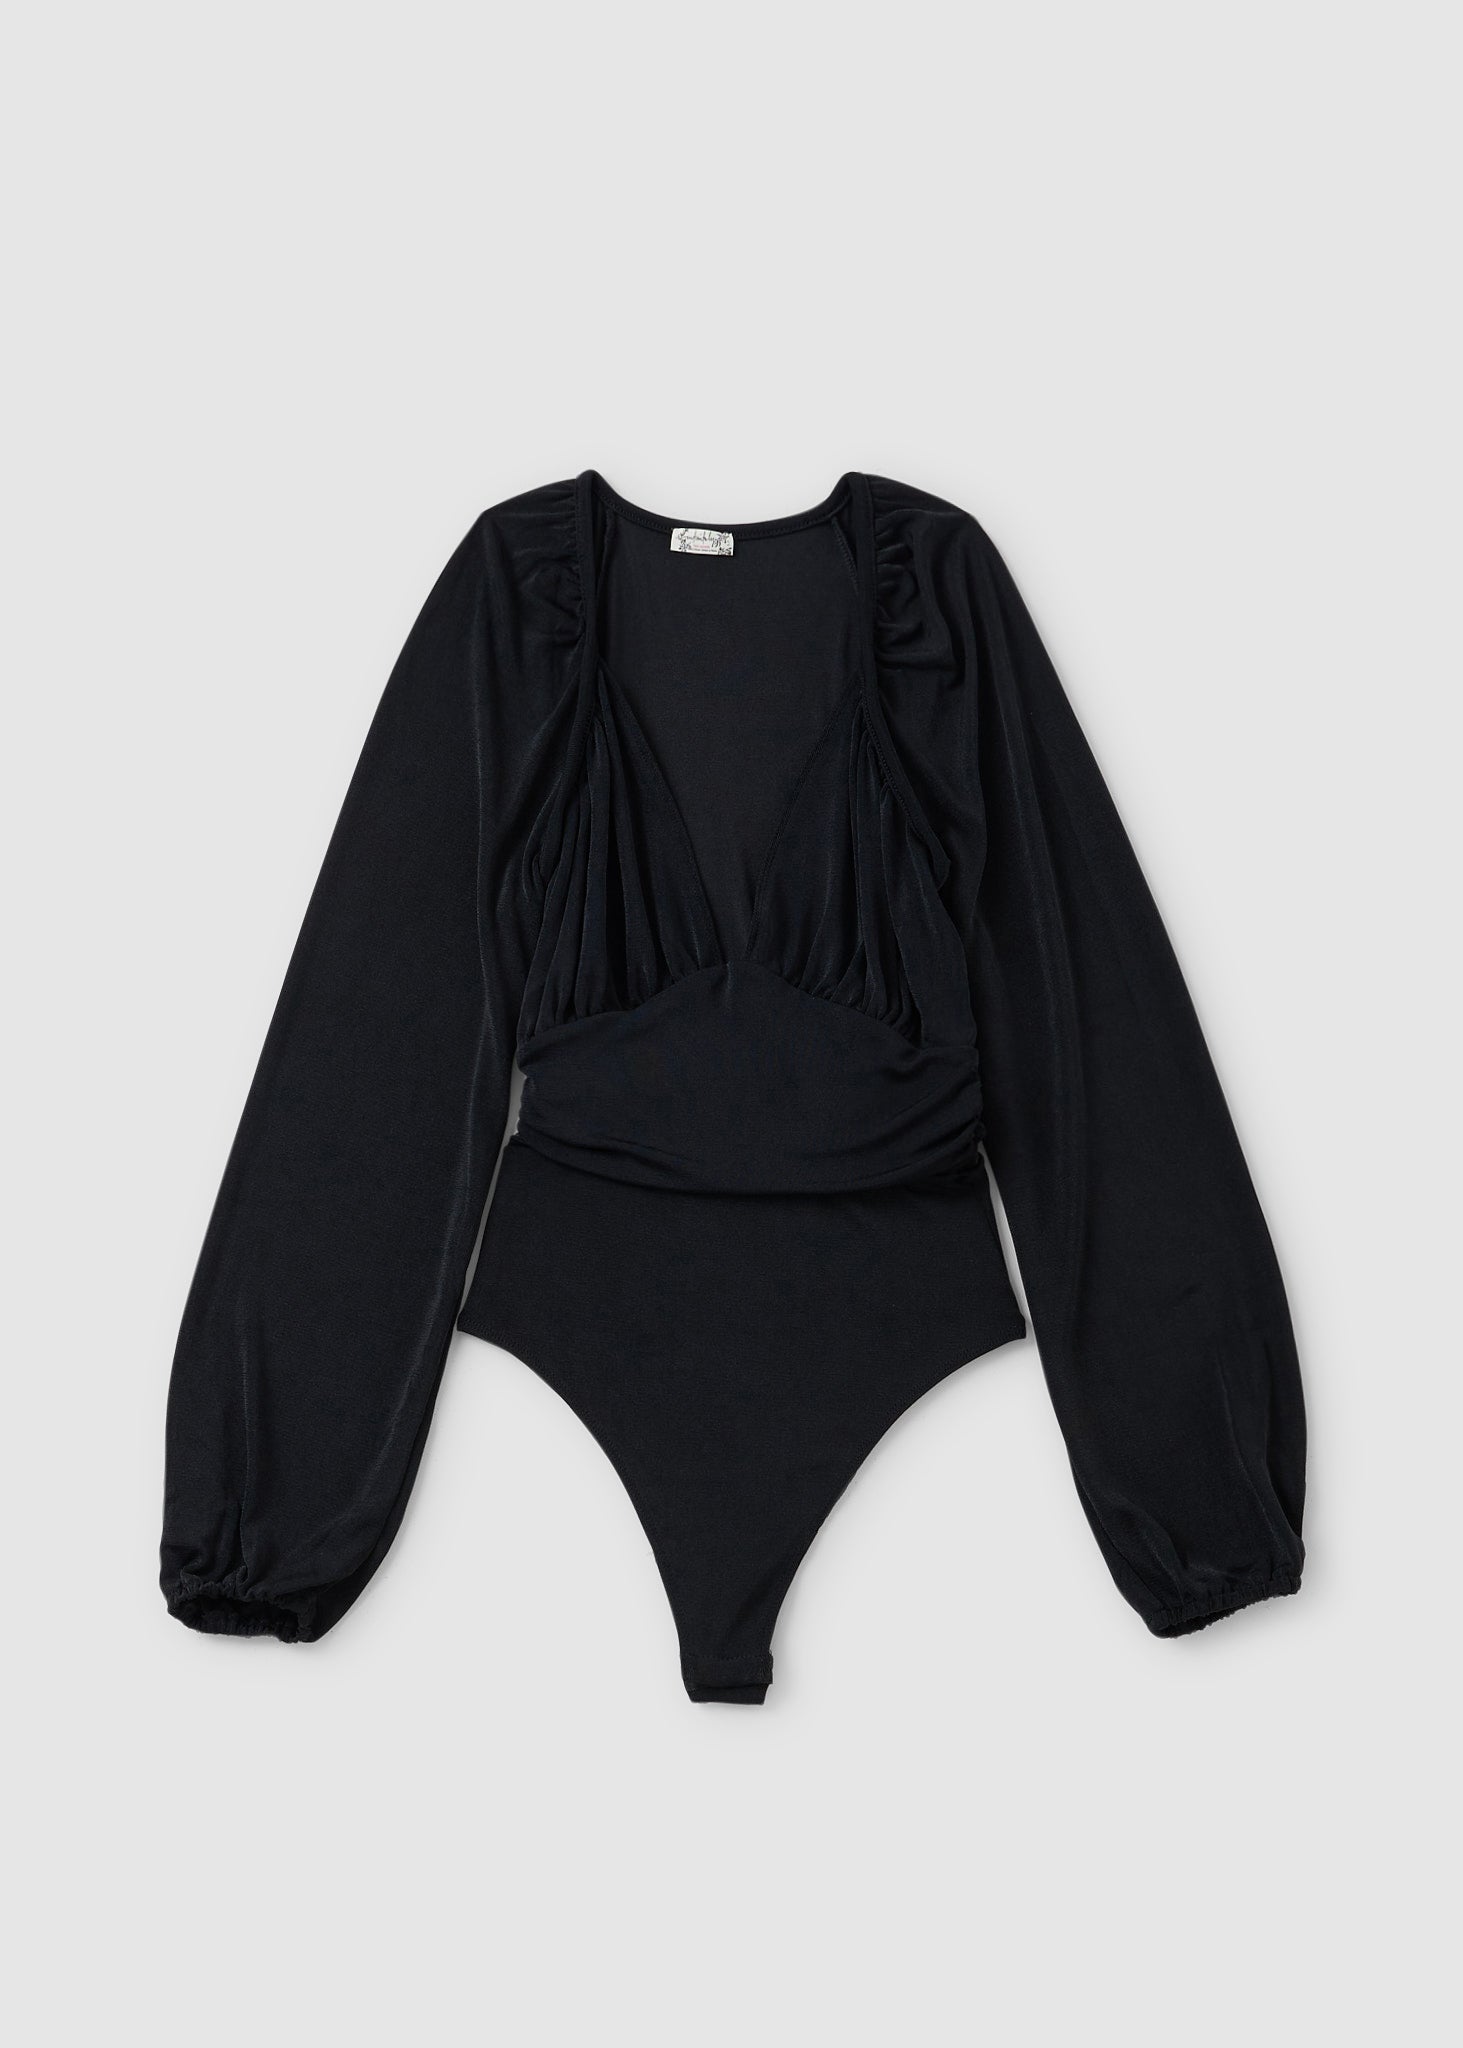 Image of Free People Womens In Your Arms Bodysuit In Black